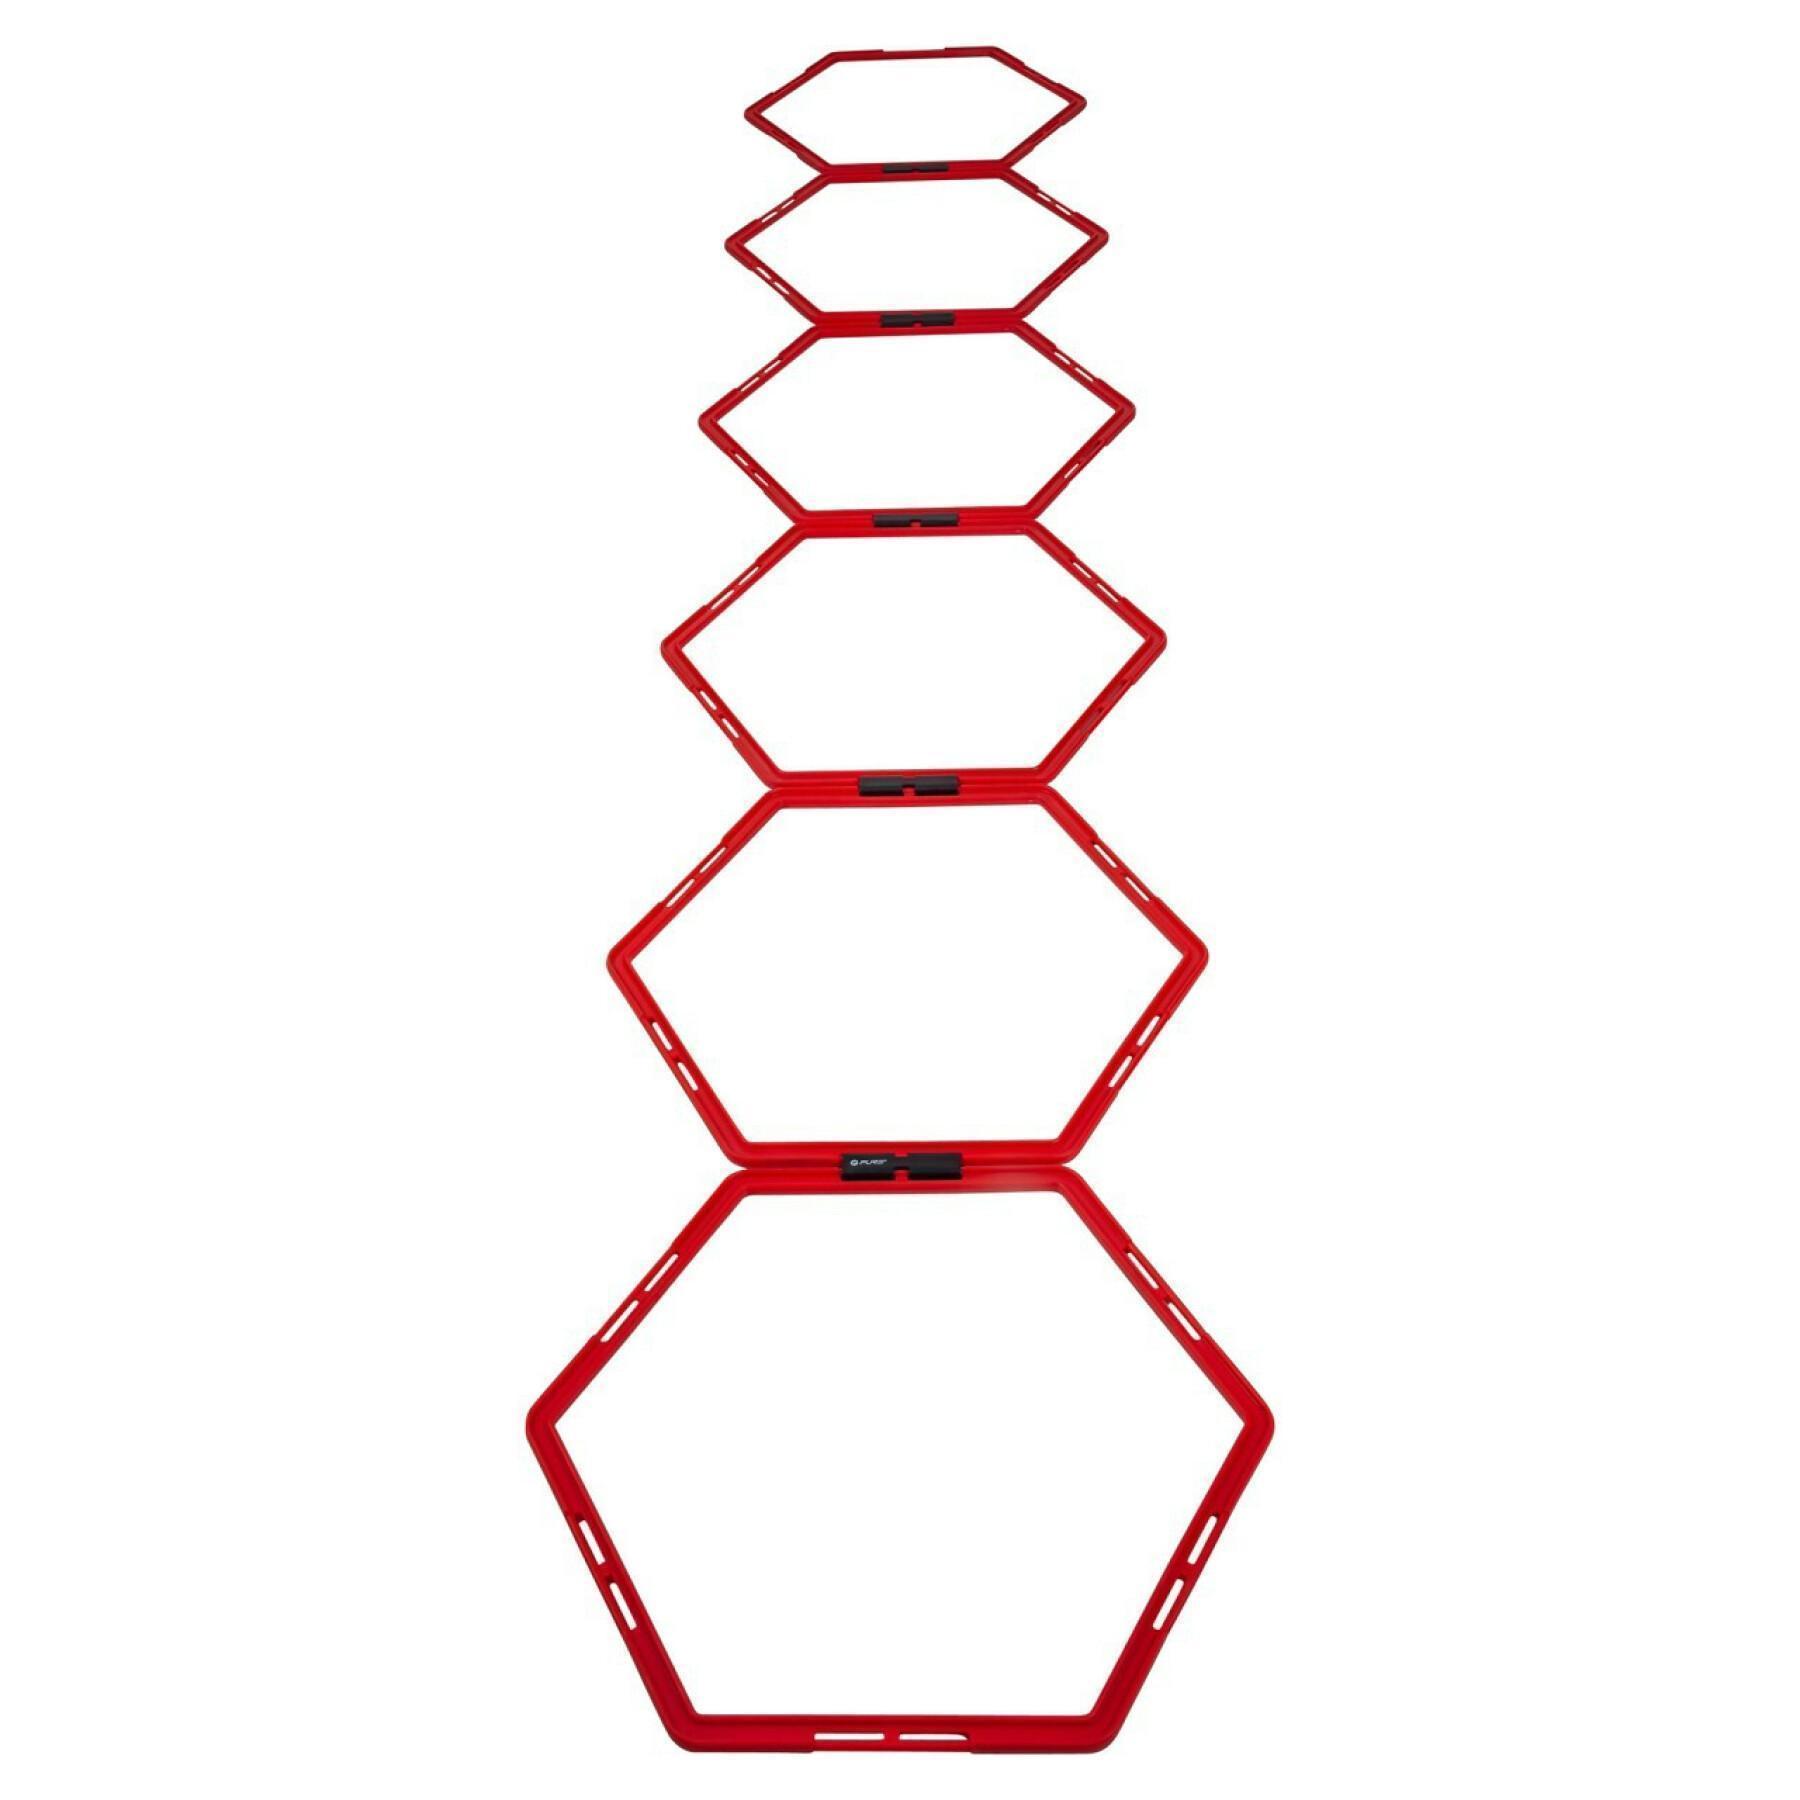 Hexagon of agility Pure2Improve - Fitness and weight training - Accessories  - Equipment